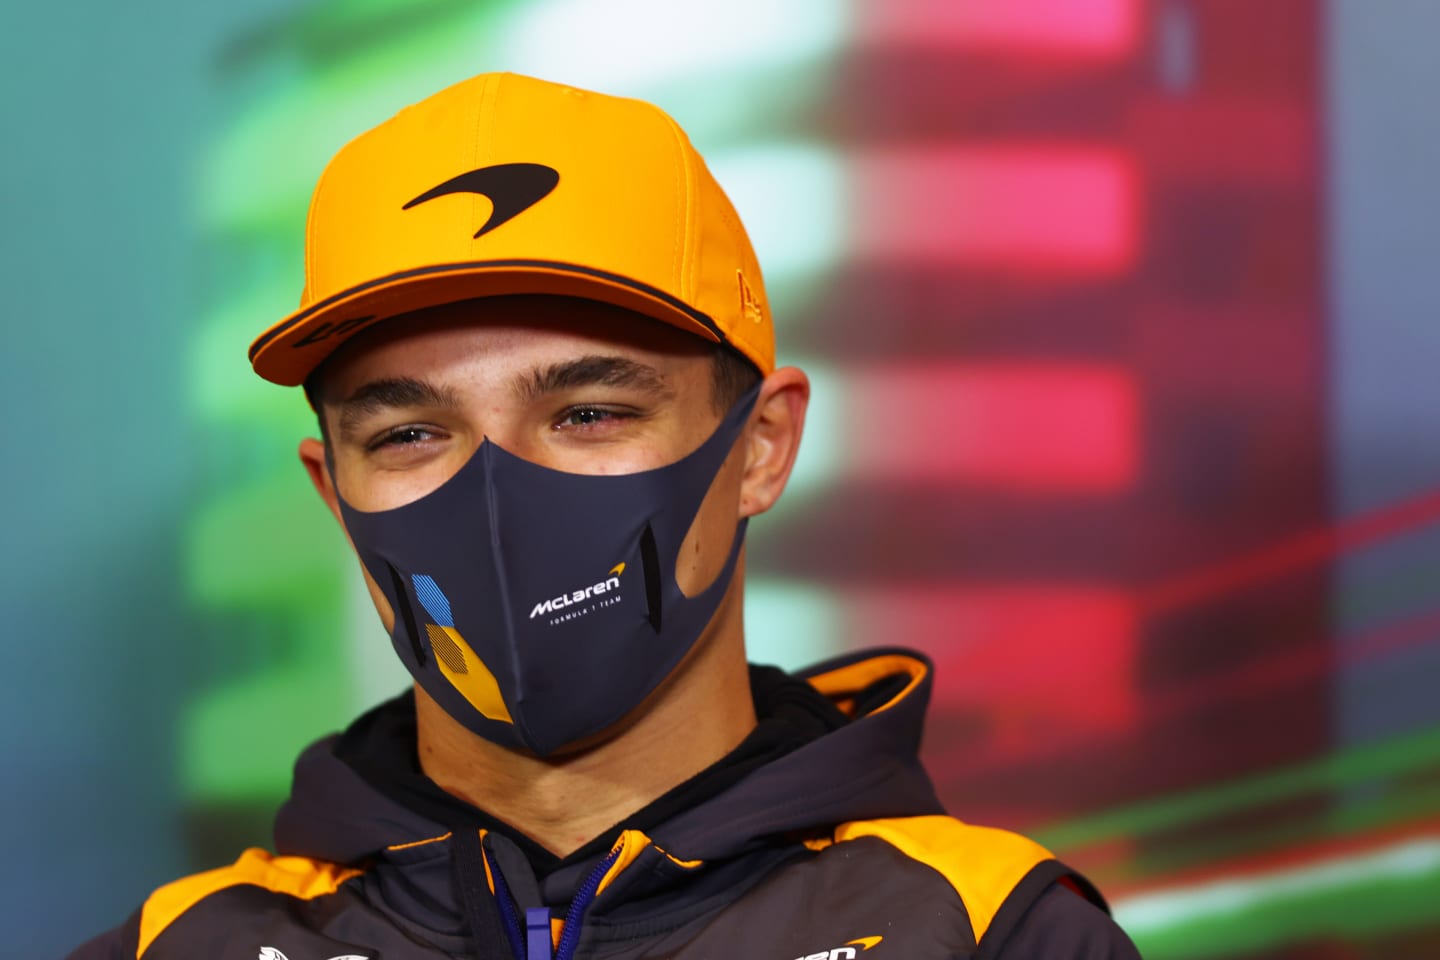 IMOLA, ITALY - APRIL 22: Lando Norris of Great Britain and McLaren talks in the Drivers Press Conference prior to practice ahead of the F1 Grand Prix of Emilia Romagna at Autodromo Enzo e Dino Ferrari on April 22, 2022 in Imola, Italy. (Photo by Lars Baron/Getty Images)